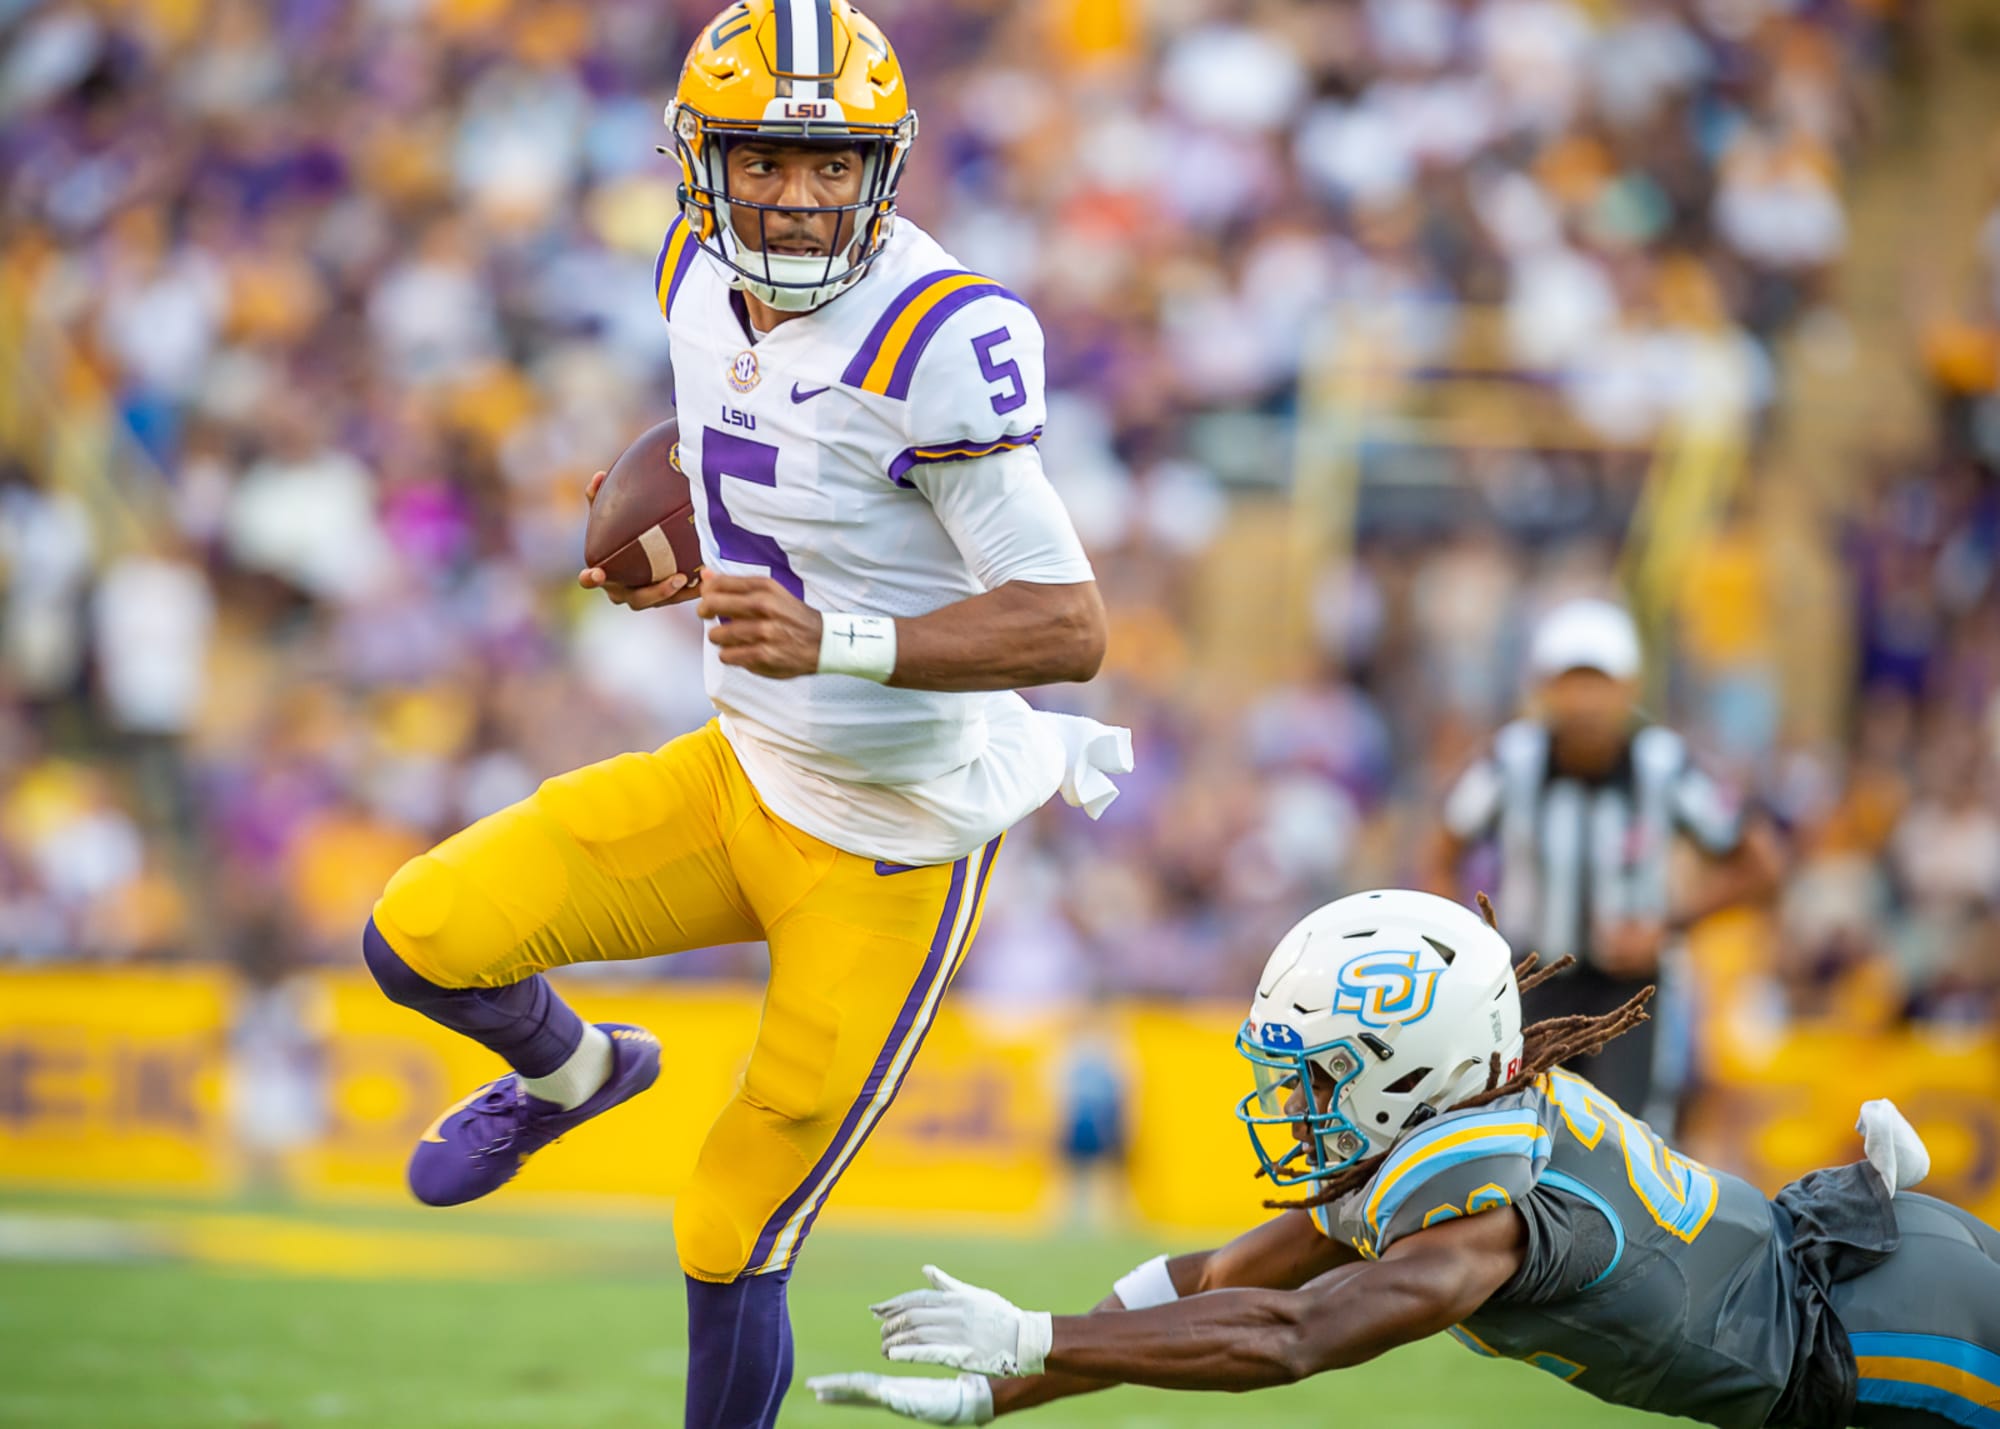 LSU football made the right decision to go with QB Jayden Daniels